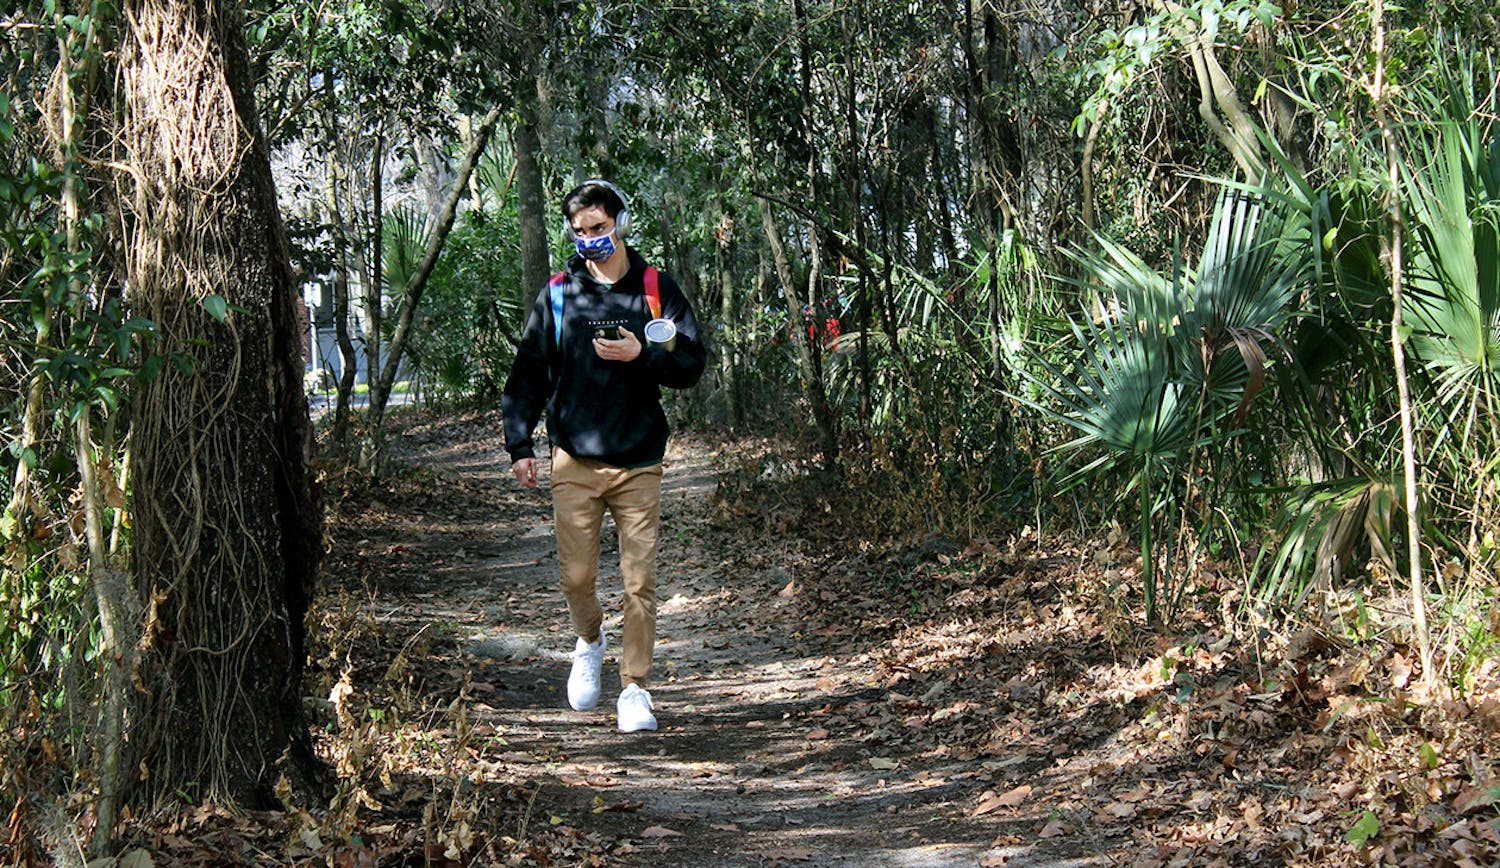 Matt Raulerson, 20, a forest resources and conservation junior, walks on a path through the McCarty Woods Conservation Area on Thursday, Feb. 4, 2021. Raulerson expressed disappointment at the news that the conservation area has been approved as a possible future site for construction. "It's horrible," he said. "It would take away all the beauty of it. It's something I pass everyday I walk to class and it's something I love looking at." 